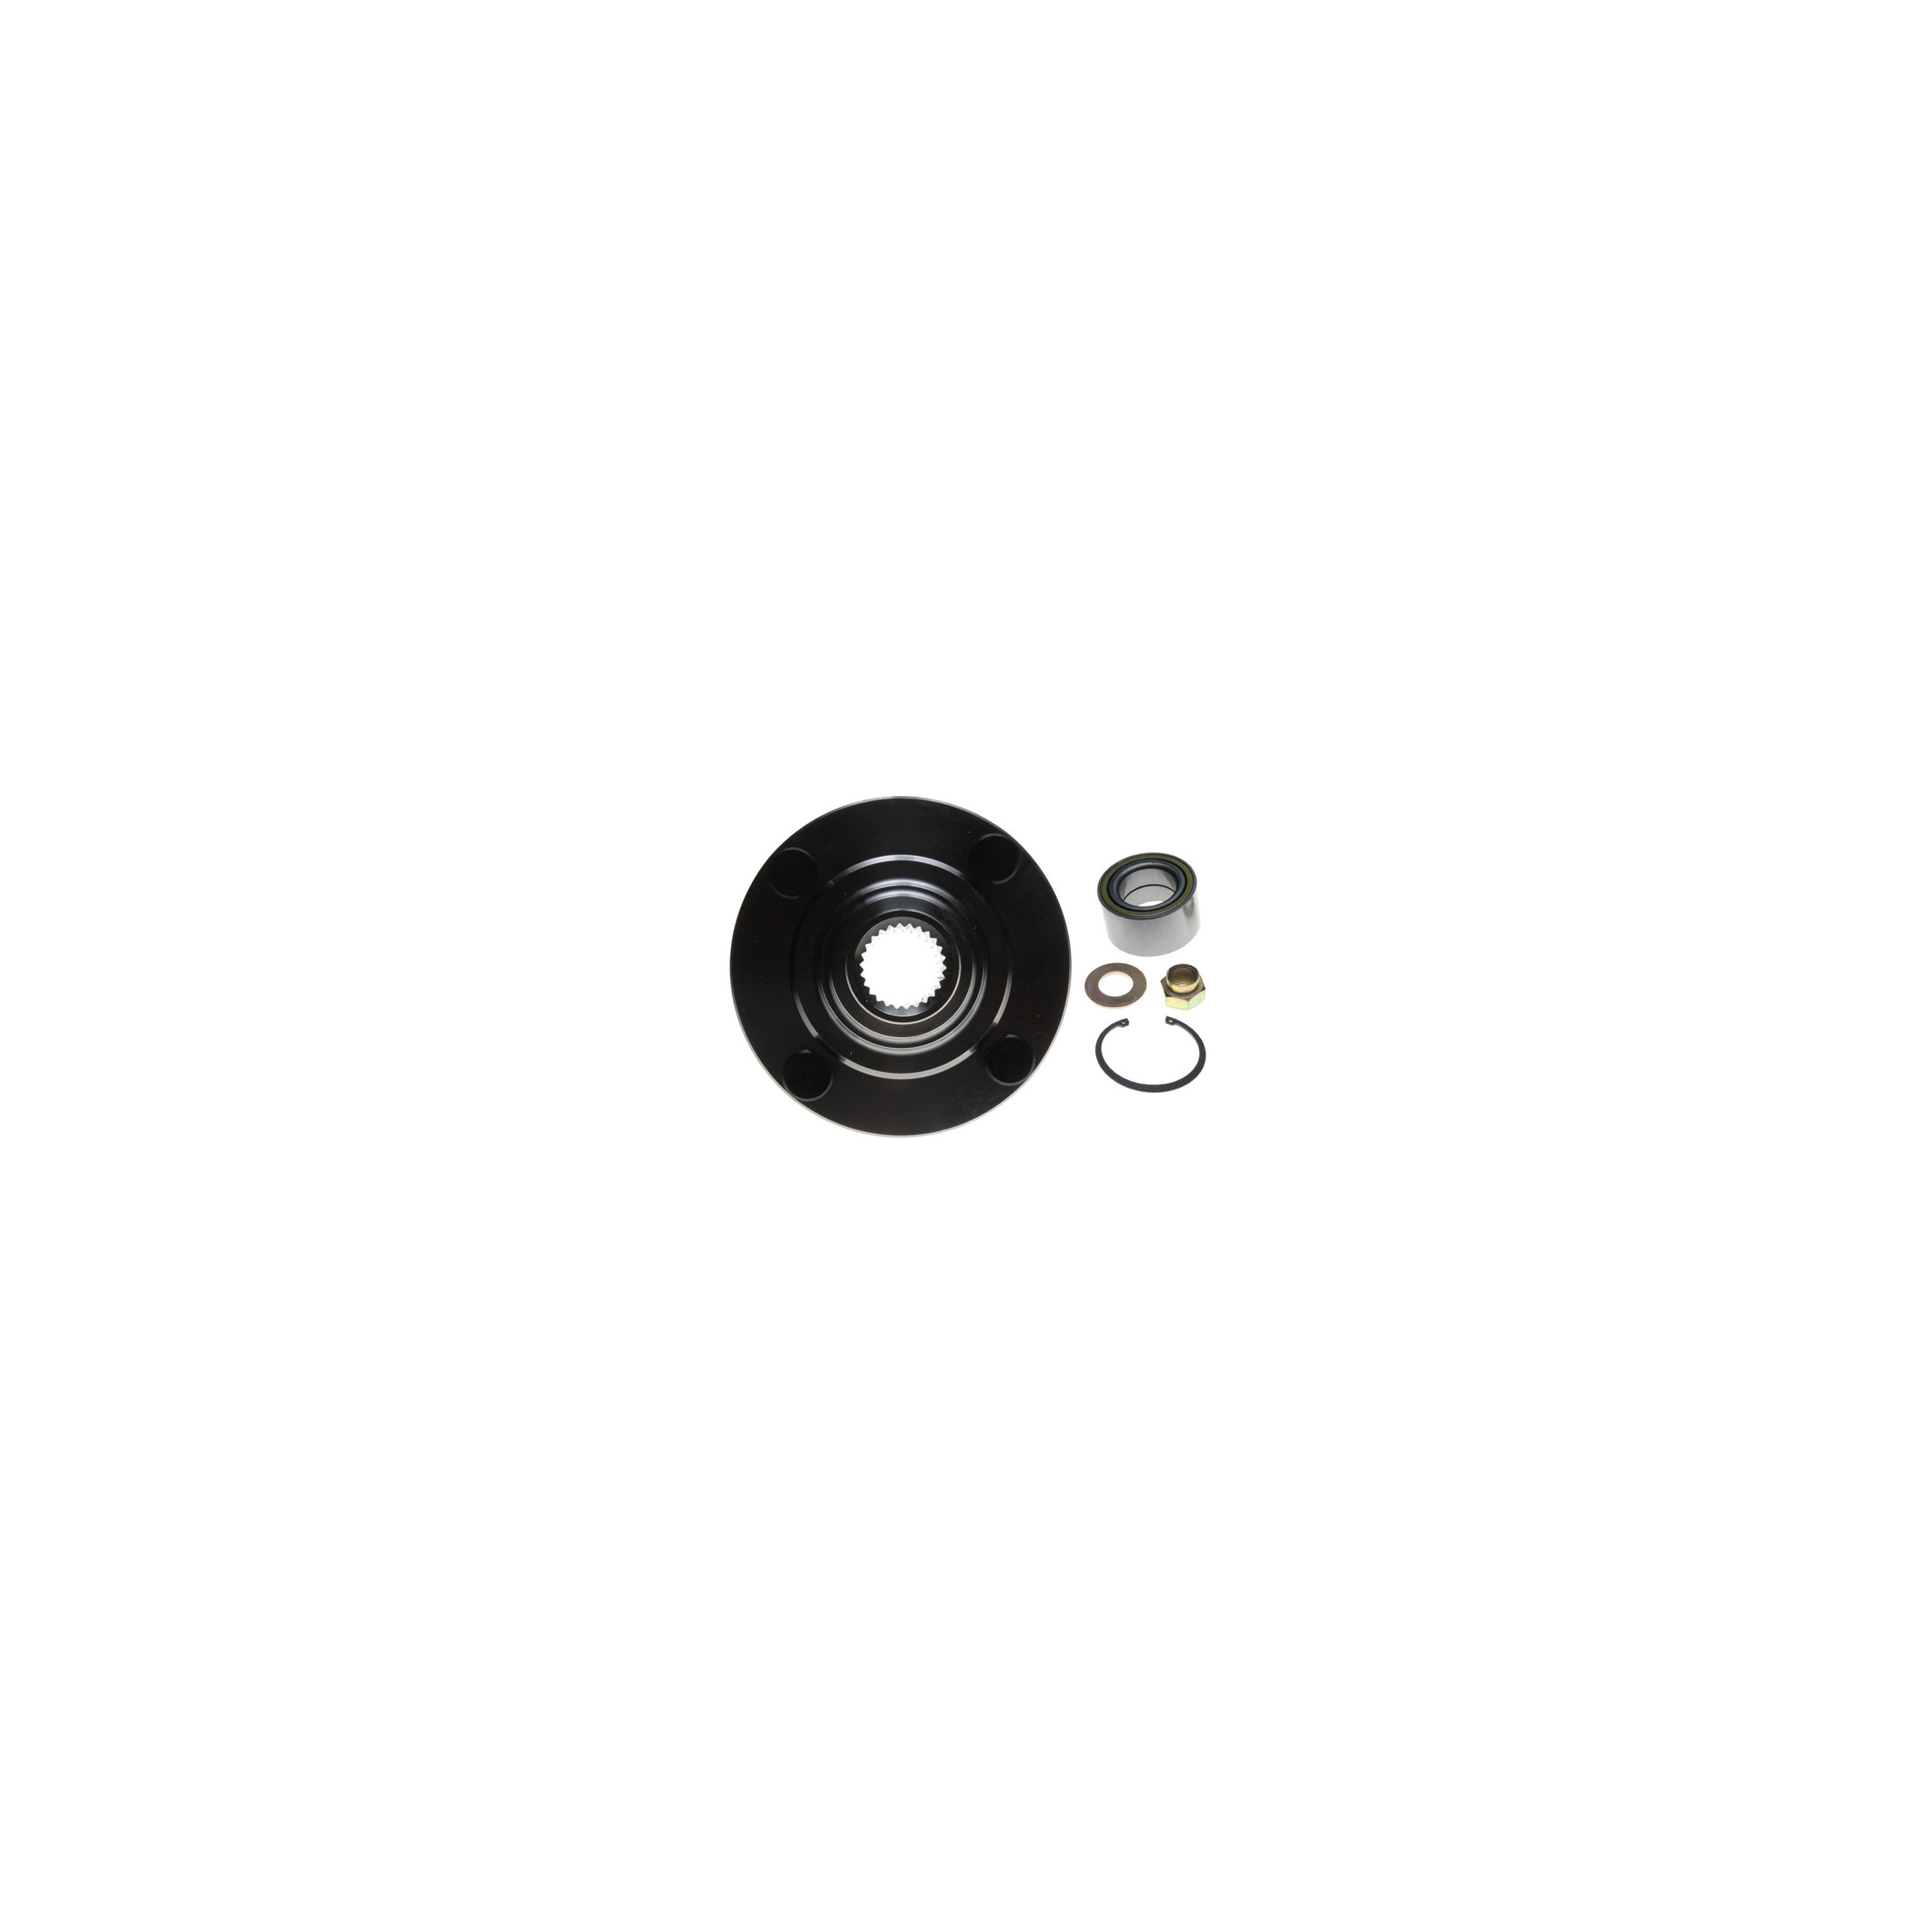 Raybestos 718503 Professional Grade Wheel Hub Repair Kit Fits select: 1983-1990 FORD ESCORT, 1984-1994 FORD TEMPO - image 3 of 3